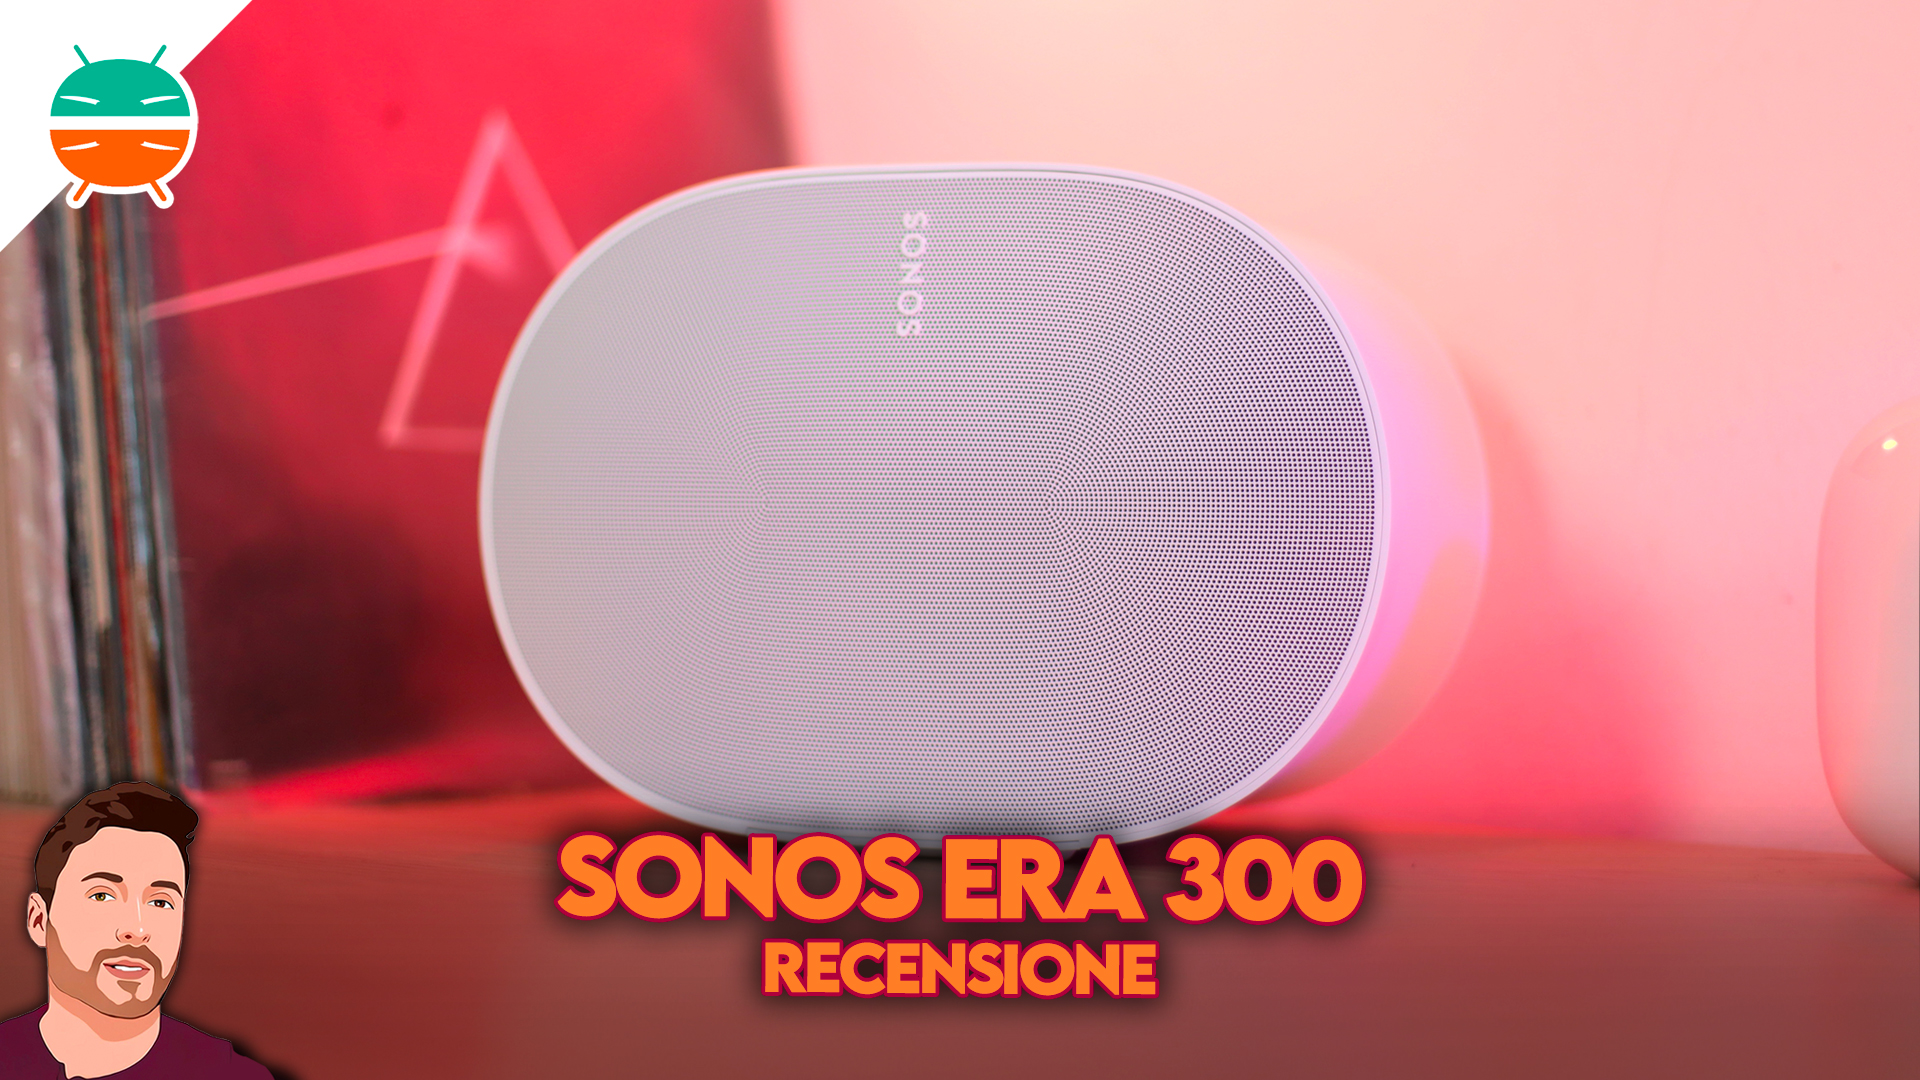 How ERA 300 positioning fits into the Dolby speaker 7.1 layout : r/sonos